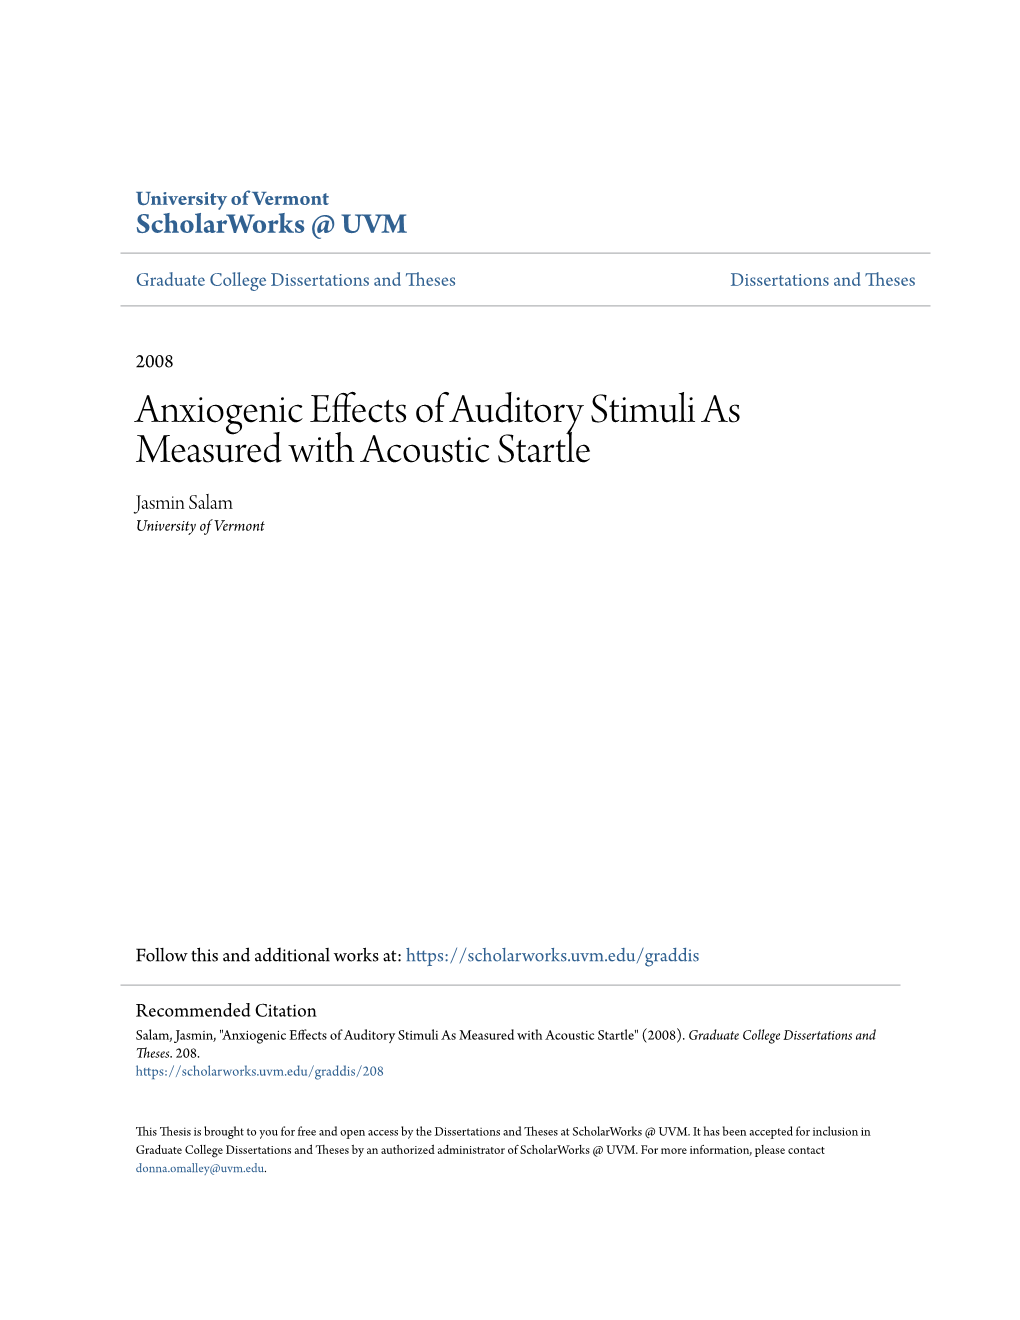 Anxiogenic Effects of Auditory Stimuli As Measured with Acoustic Startle Jasmin Salam University of Vermont